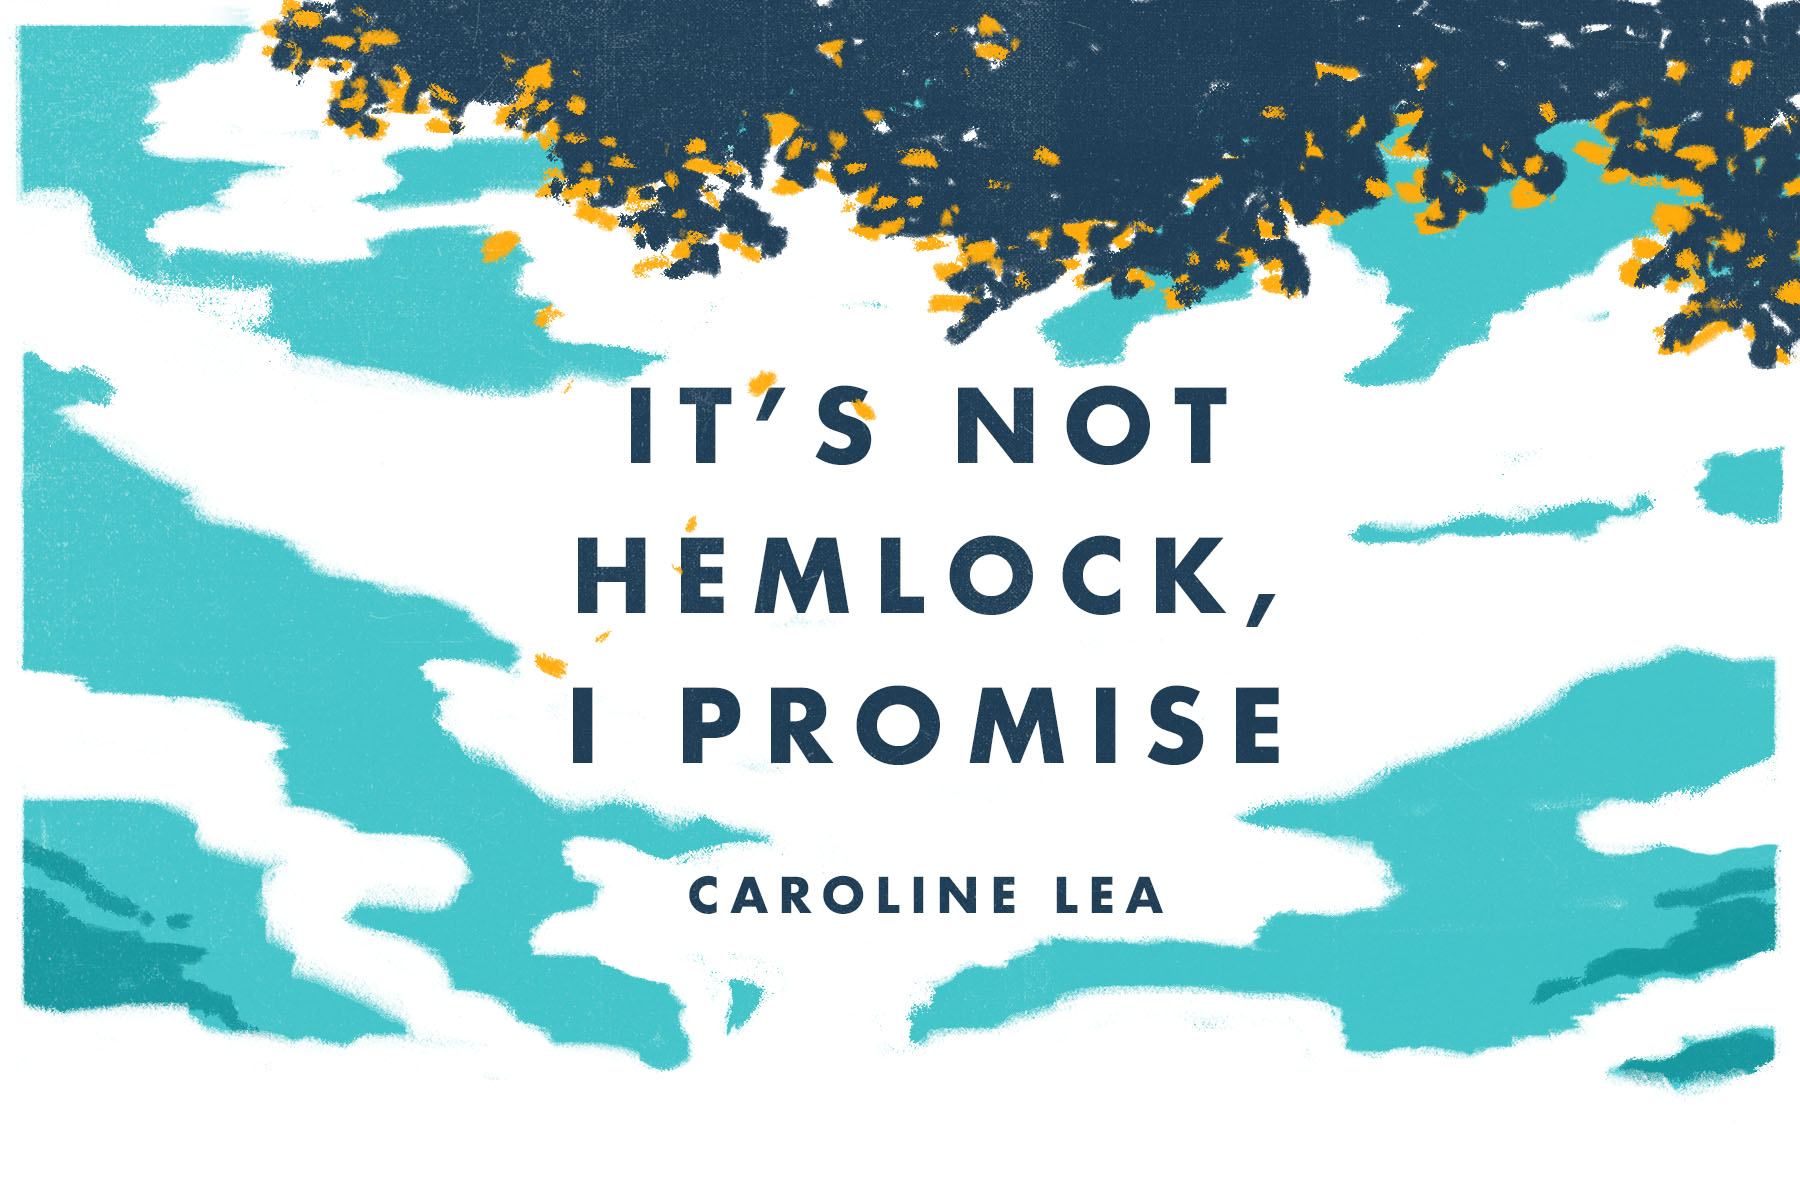 The words 'It's not hemlock, I promise' on an illustrated background of blue and white clouds and the yellow-tinged silhouette of a tree